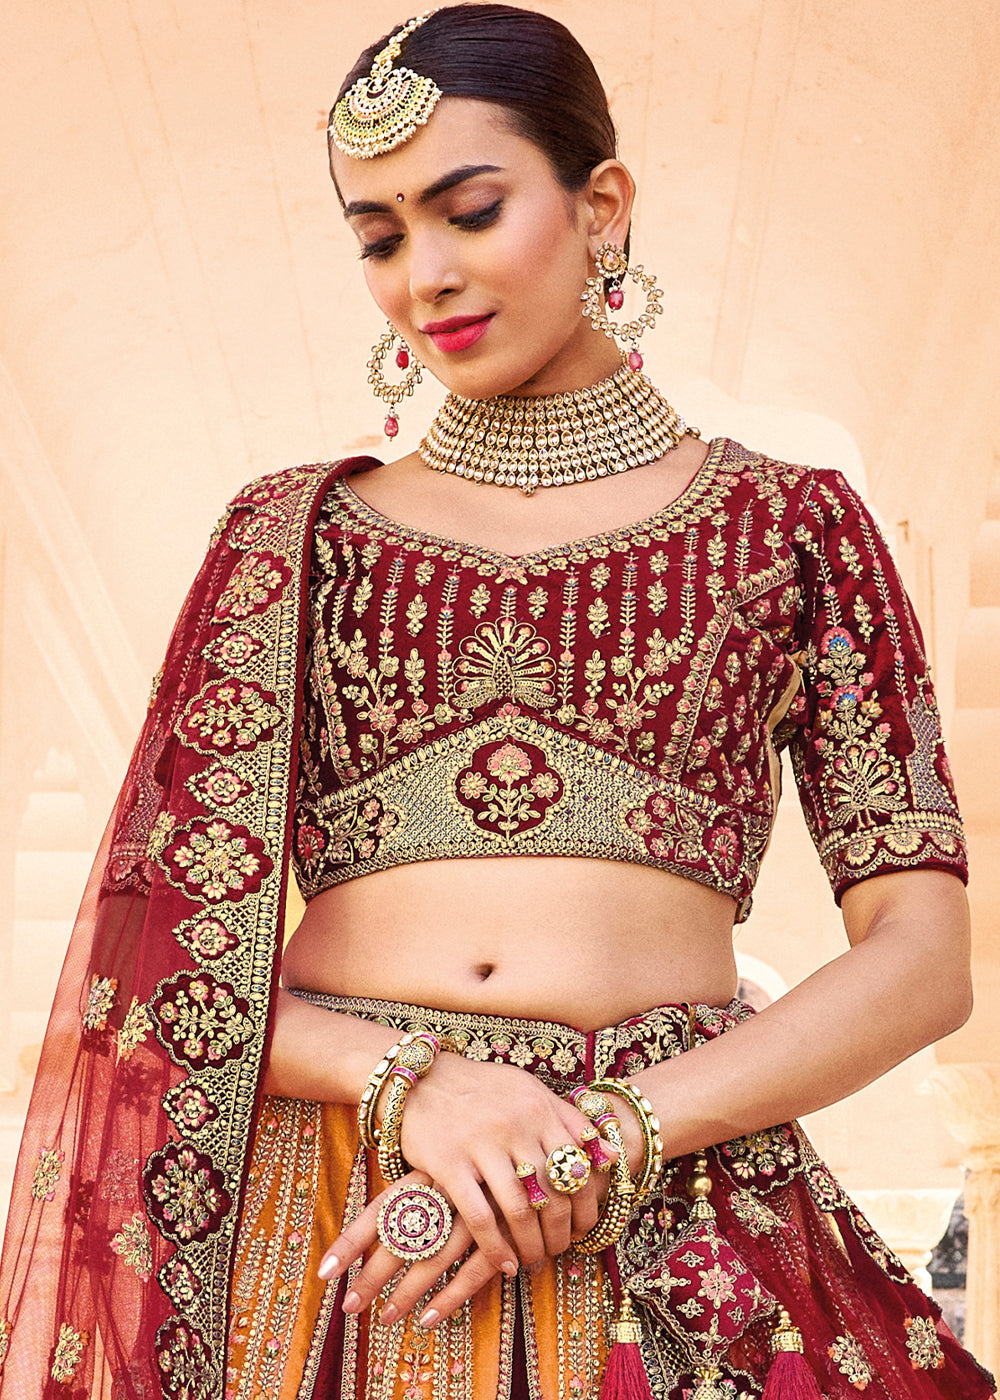 Best colours for your wedding lehenga, other than red | EconomicTimes